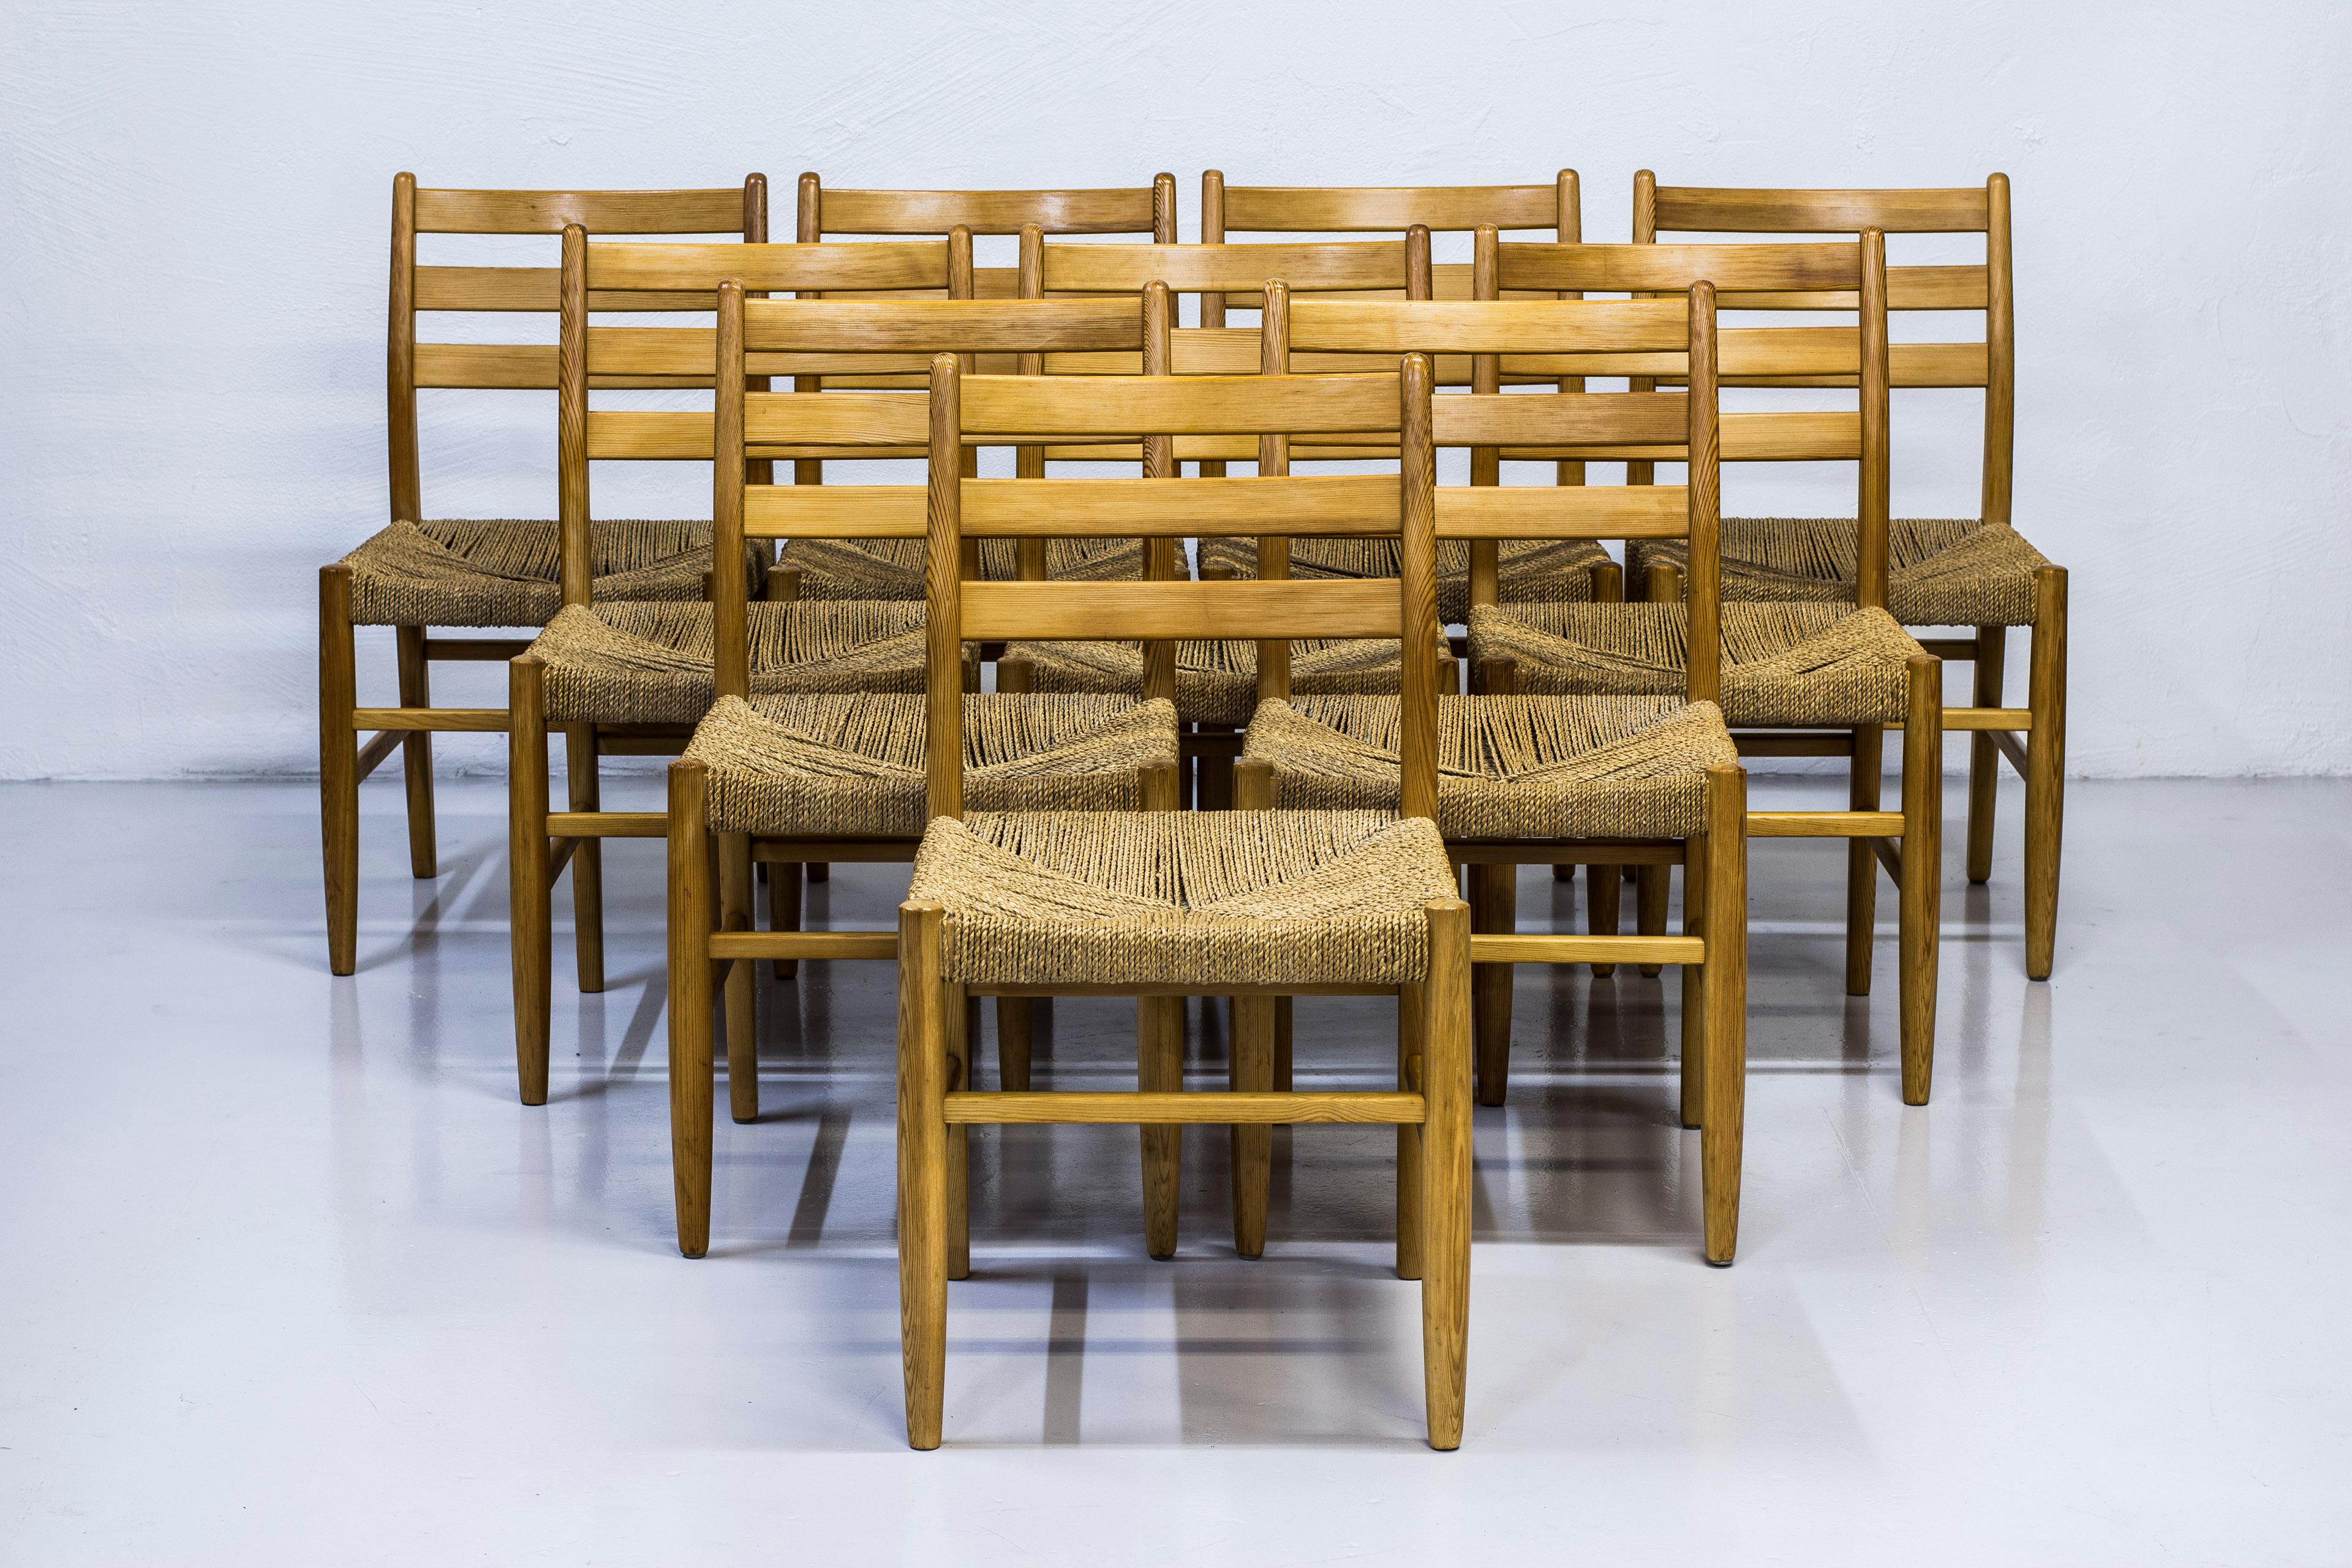 Set of ten dining chairs designed by Harry Moen for Konrad Steinstads Snekkerverksted. Produced in Norway during the 1960s. Made from solid pine with seats of weaved seaweed chord. Very good vintage condition with signs of wear and light